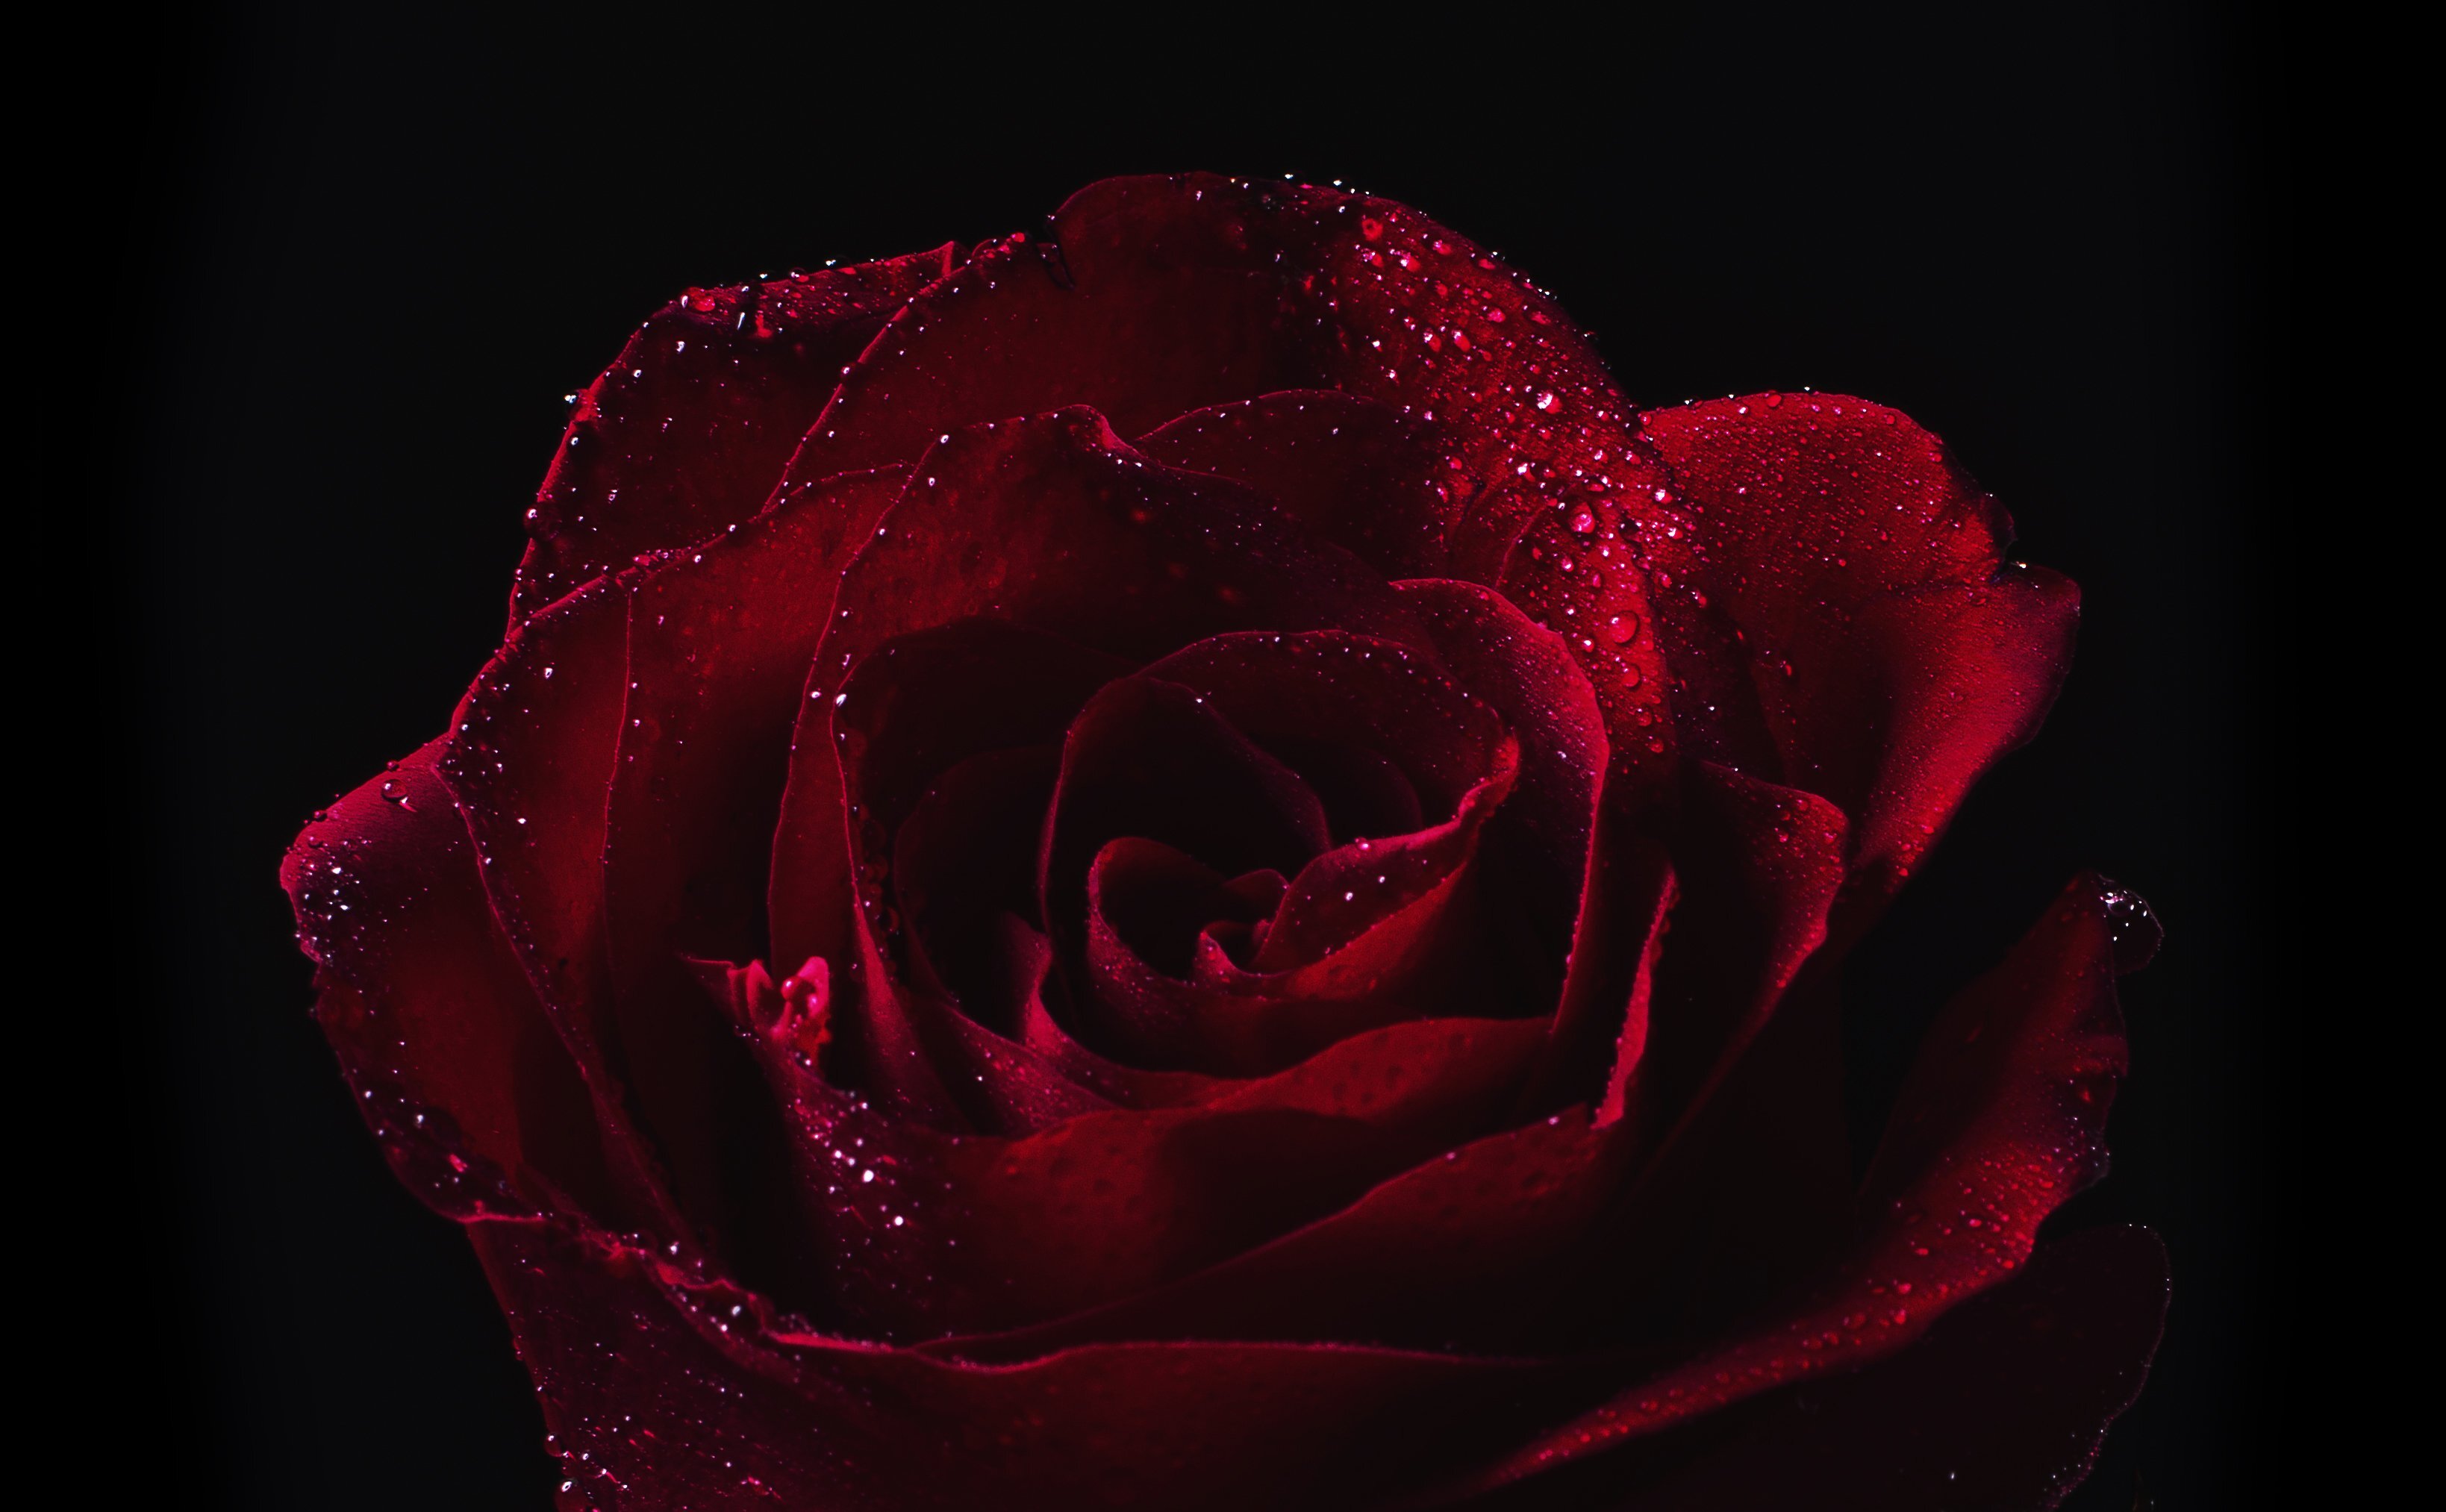 Red Roses With Dew Drop Wallpapers Share